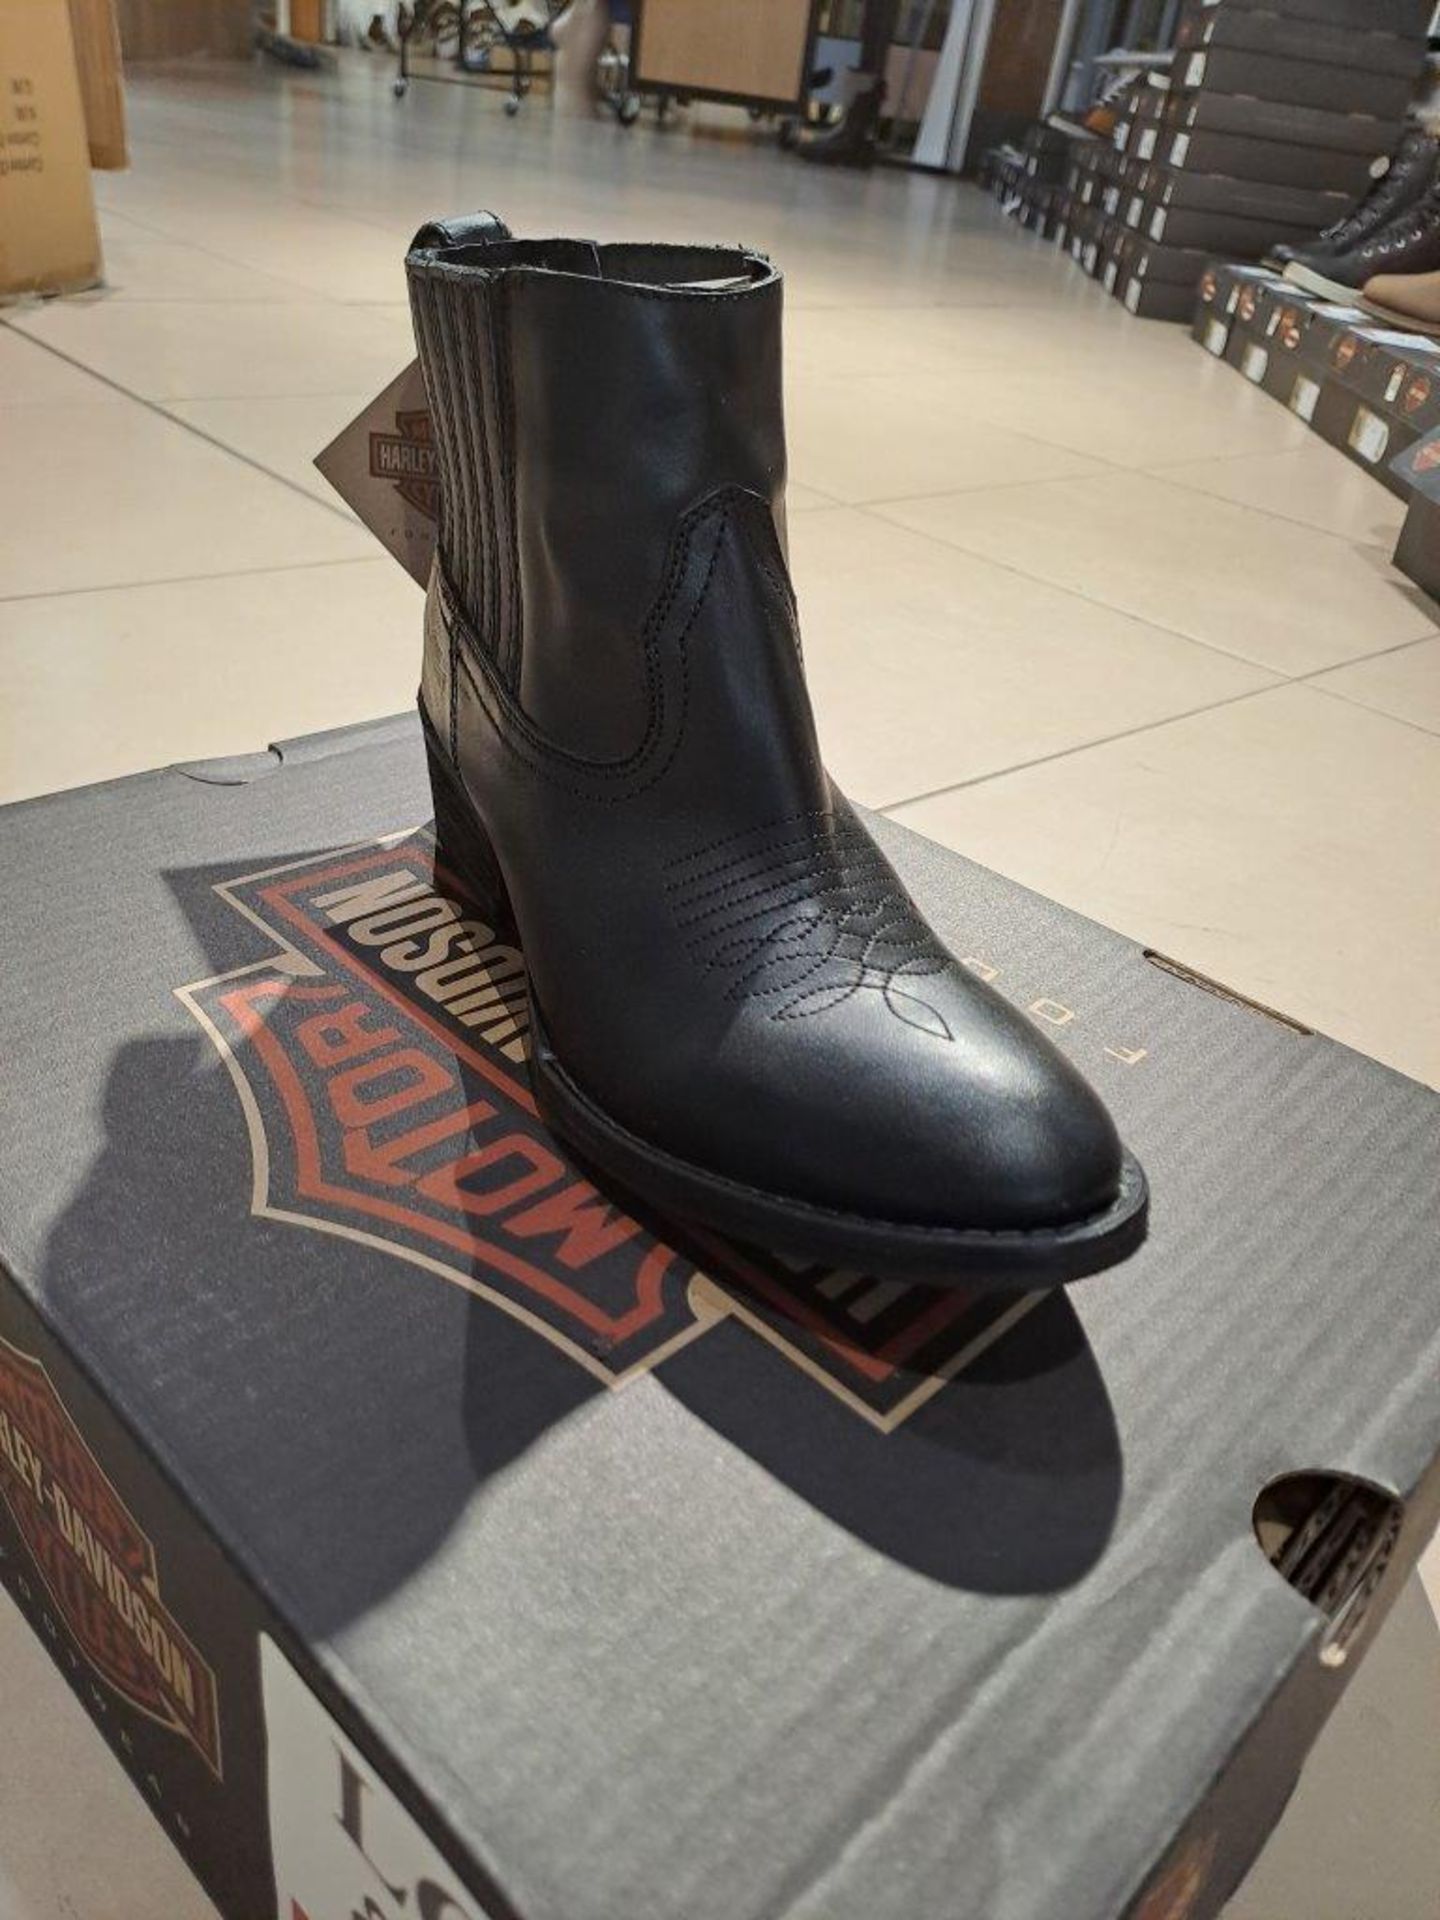 Harley Davidson Curwood Size 7.5 Womens Boots - Image 2 of 8